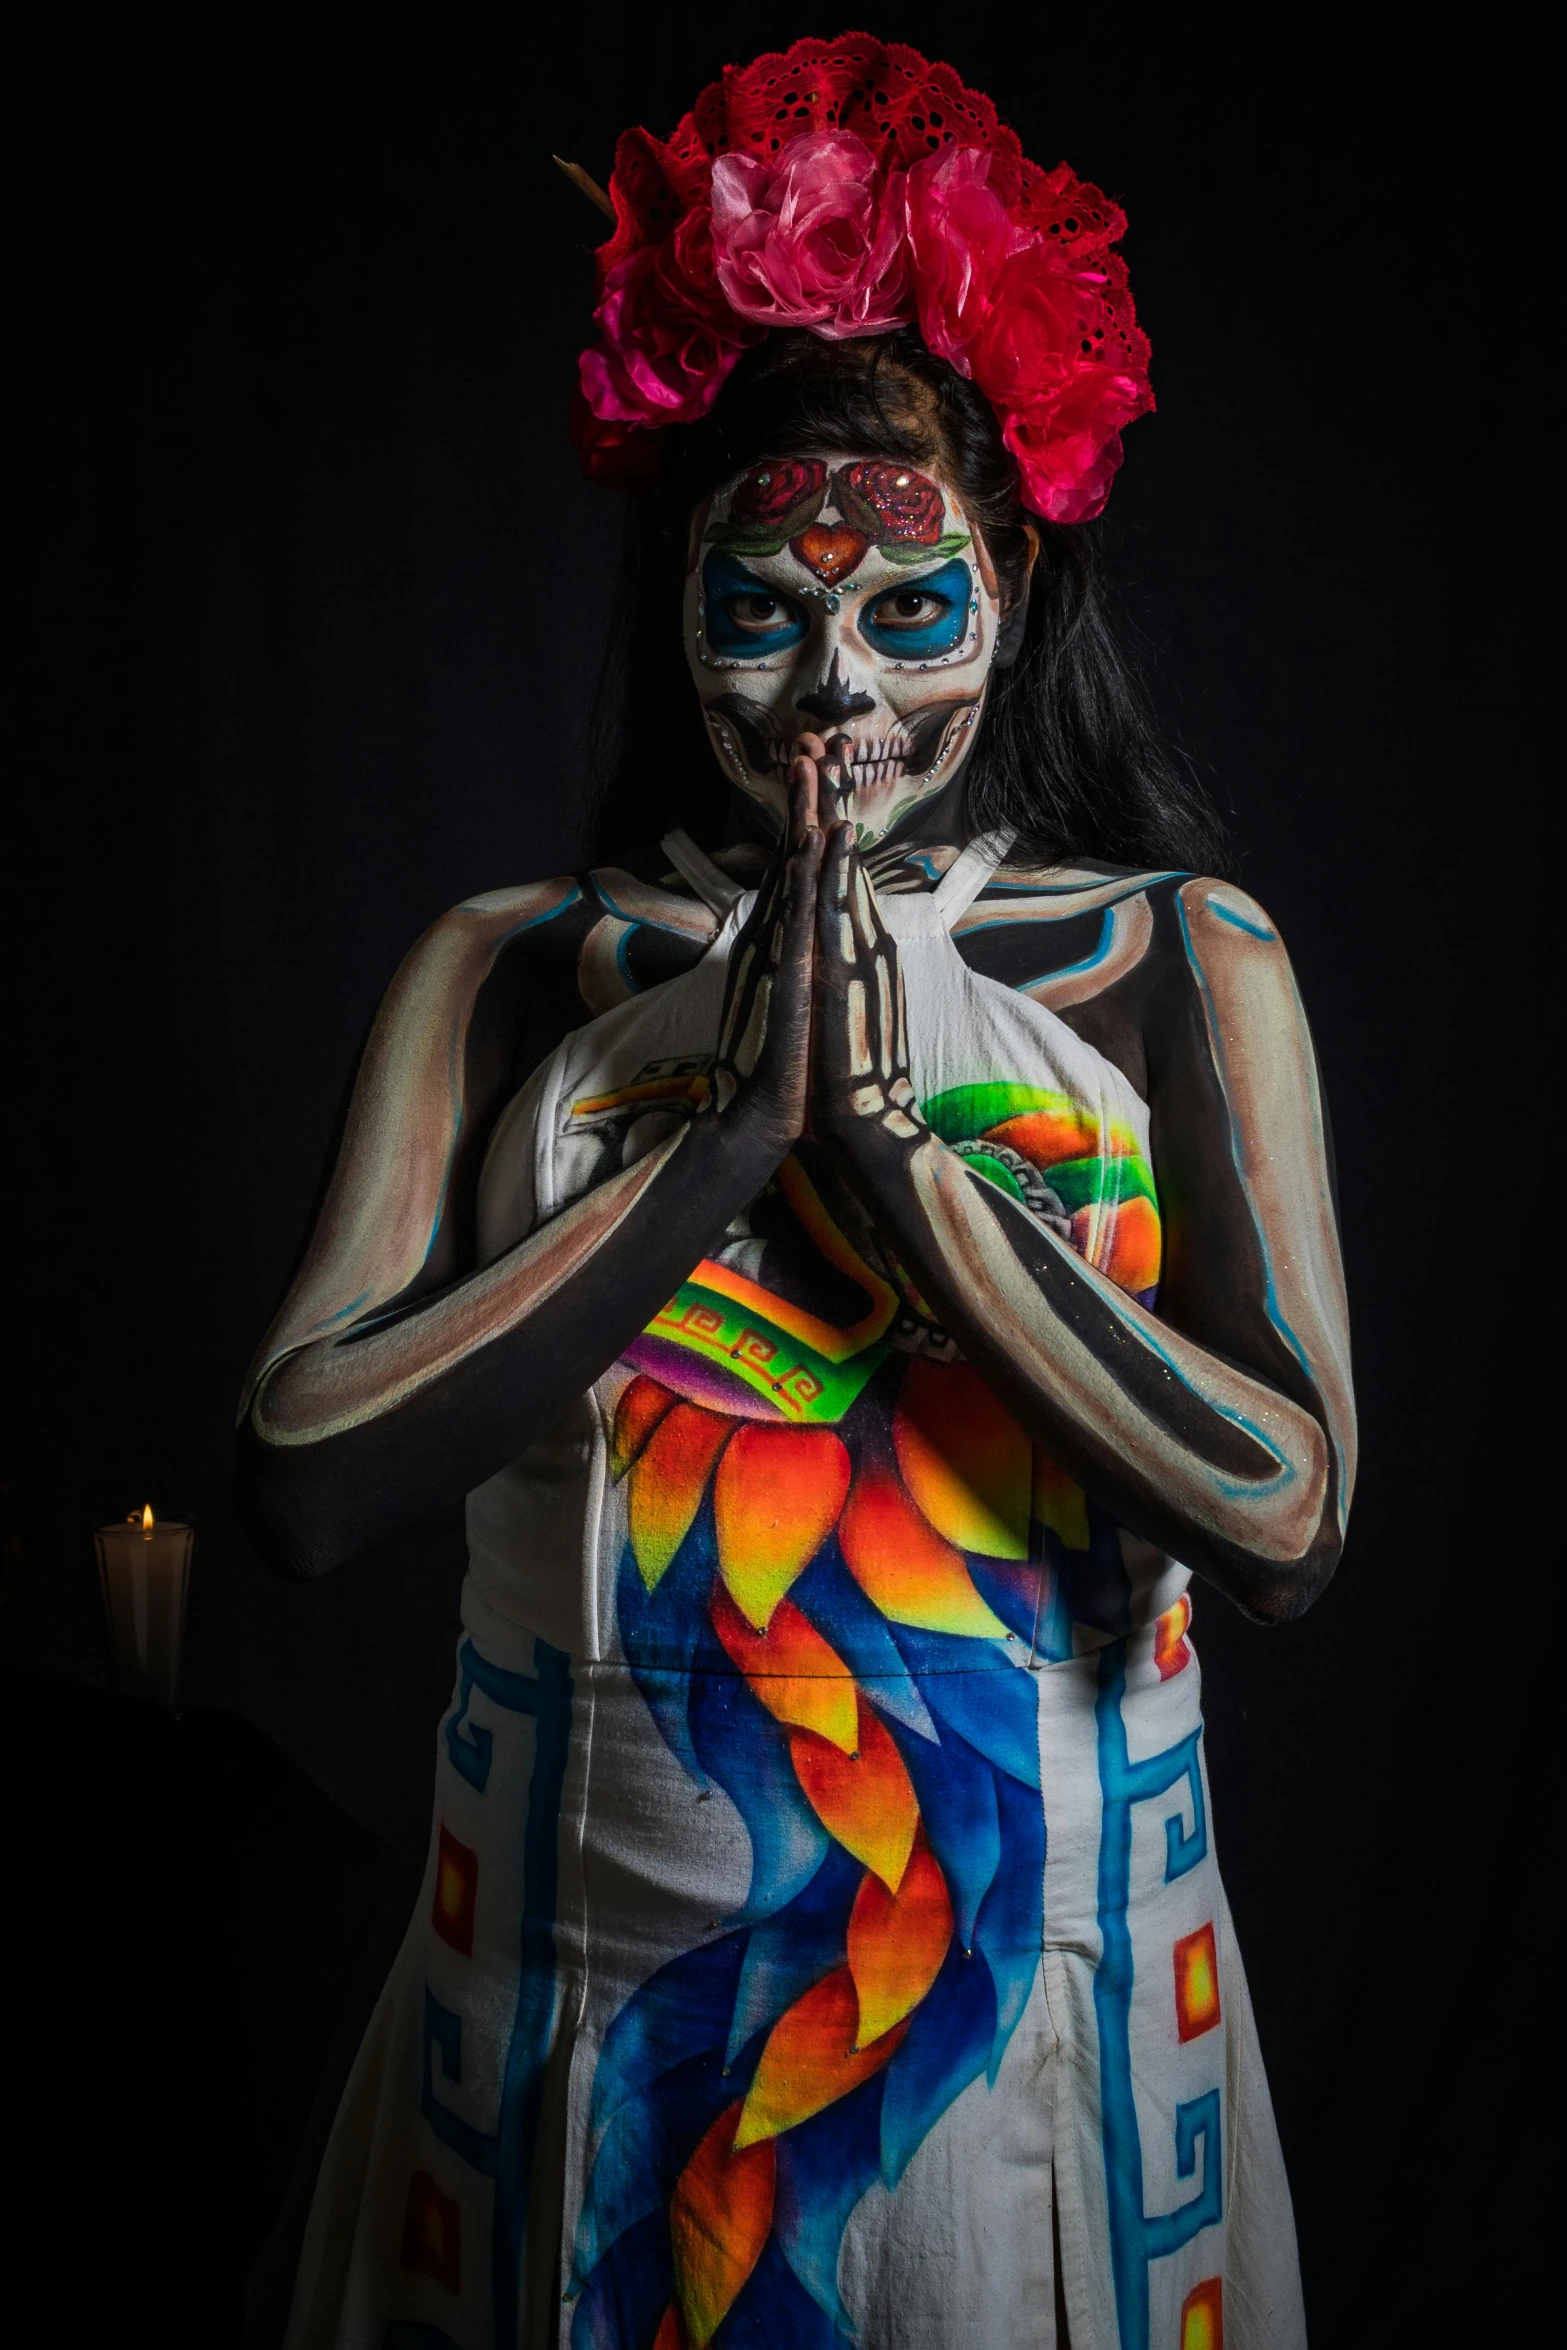 a woman with painted body paint is holding up a knife